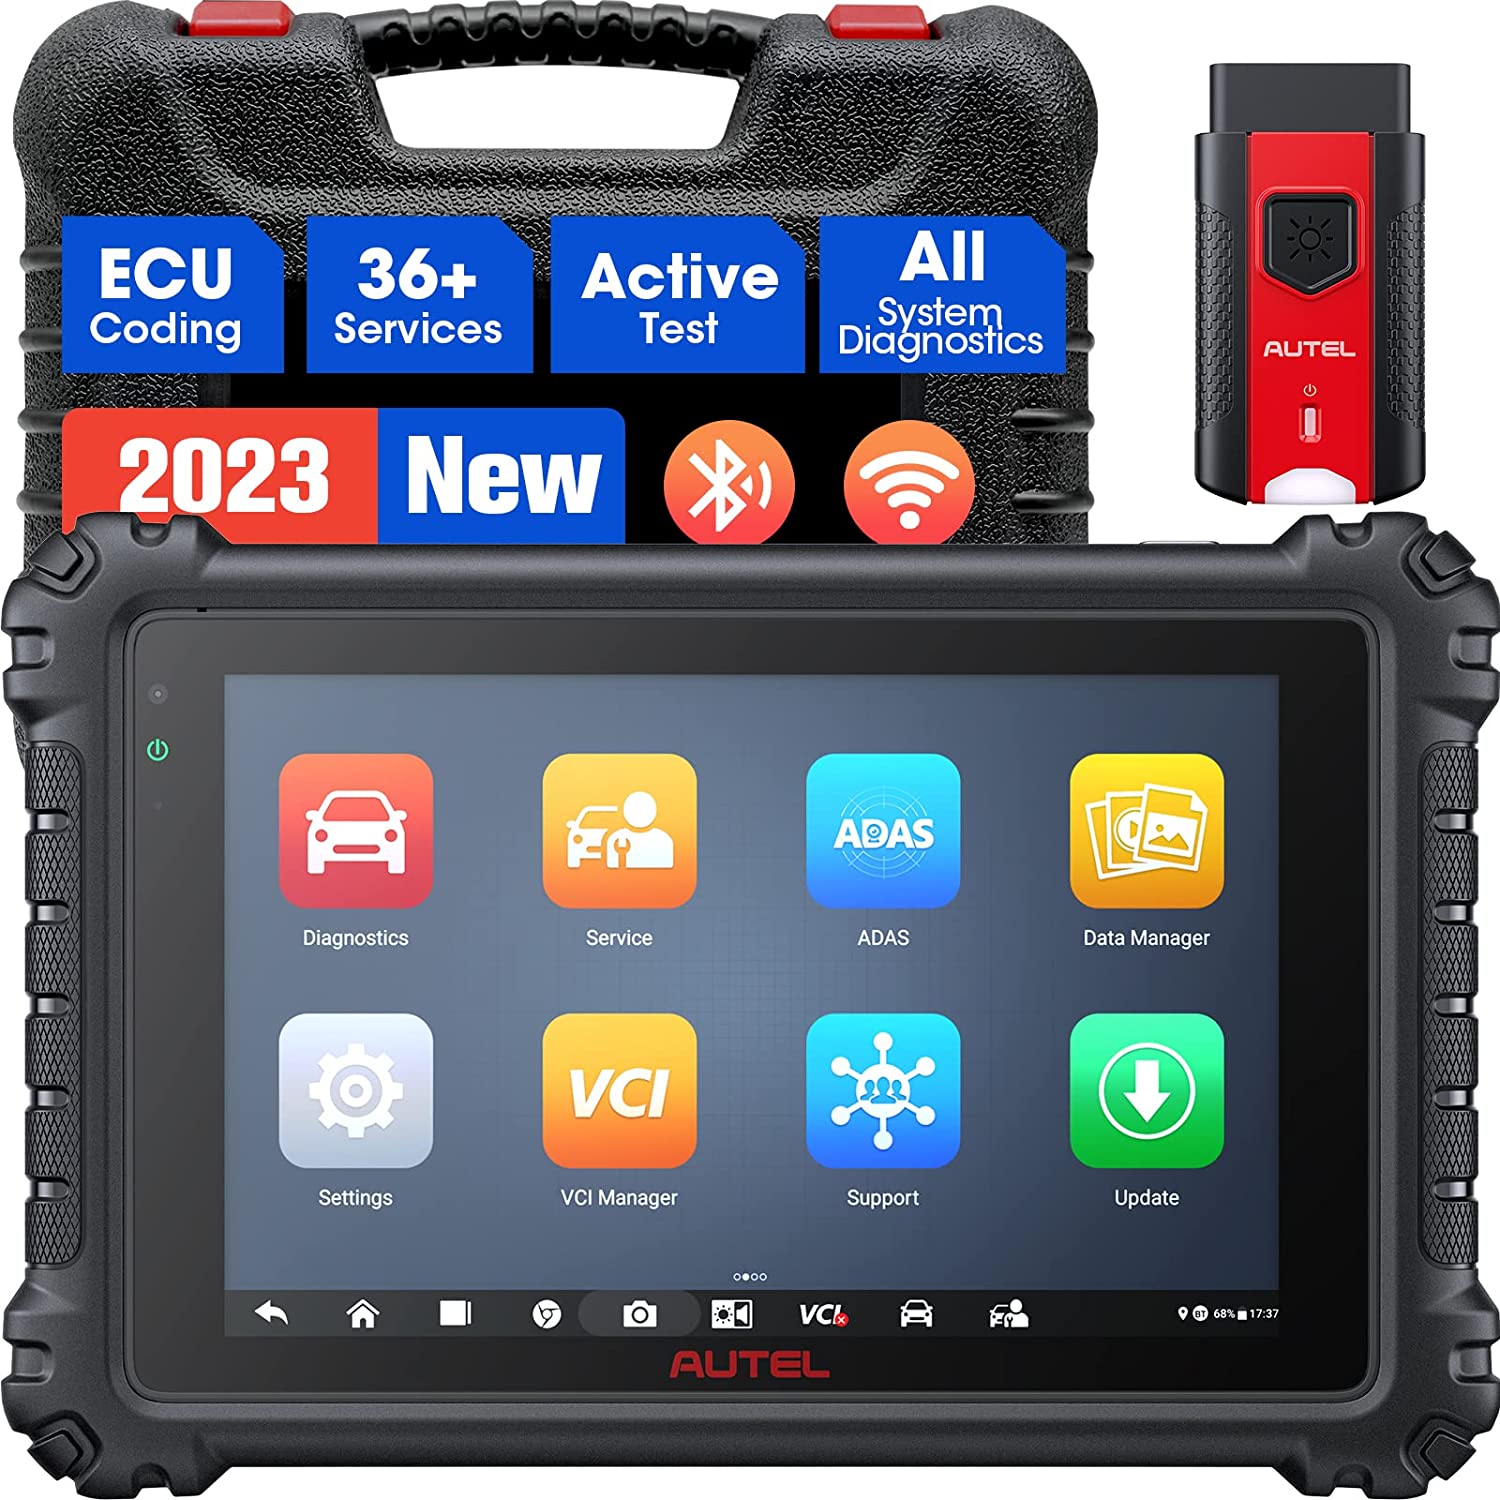 Autel MaxiSys MS906 Pro Car Diagnostic Tool, Updated of MS906BT/ MK906BT/ MS906, ECU Coding, Bidirectional Control & Full Diagnose, 36+ Services